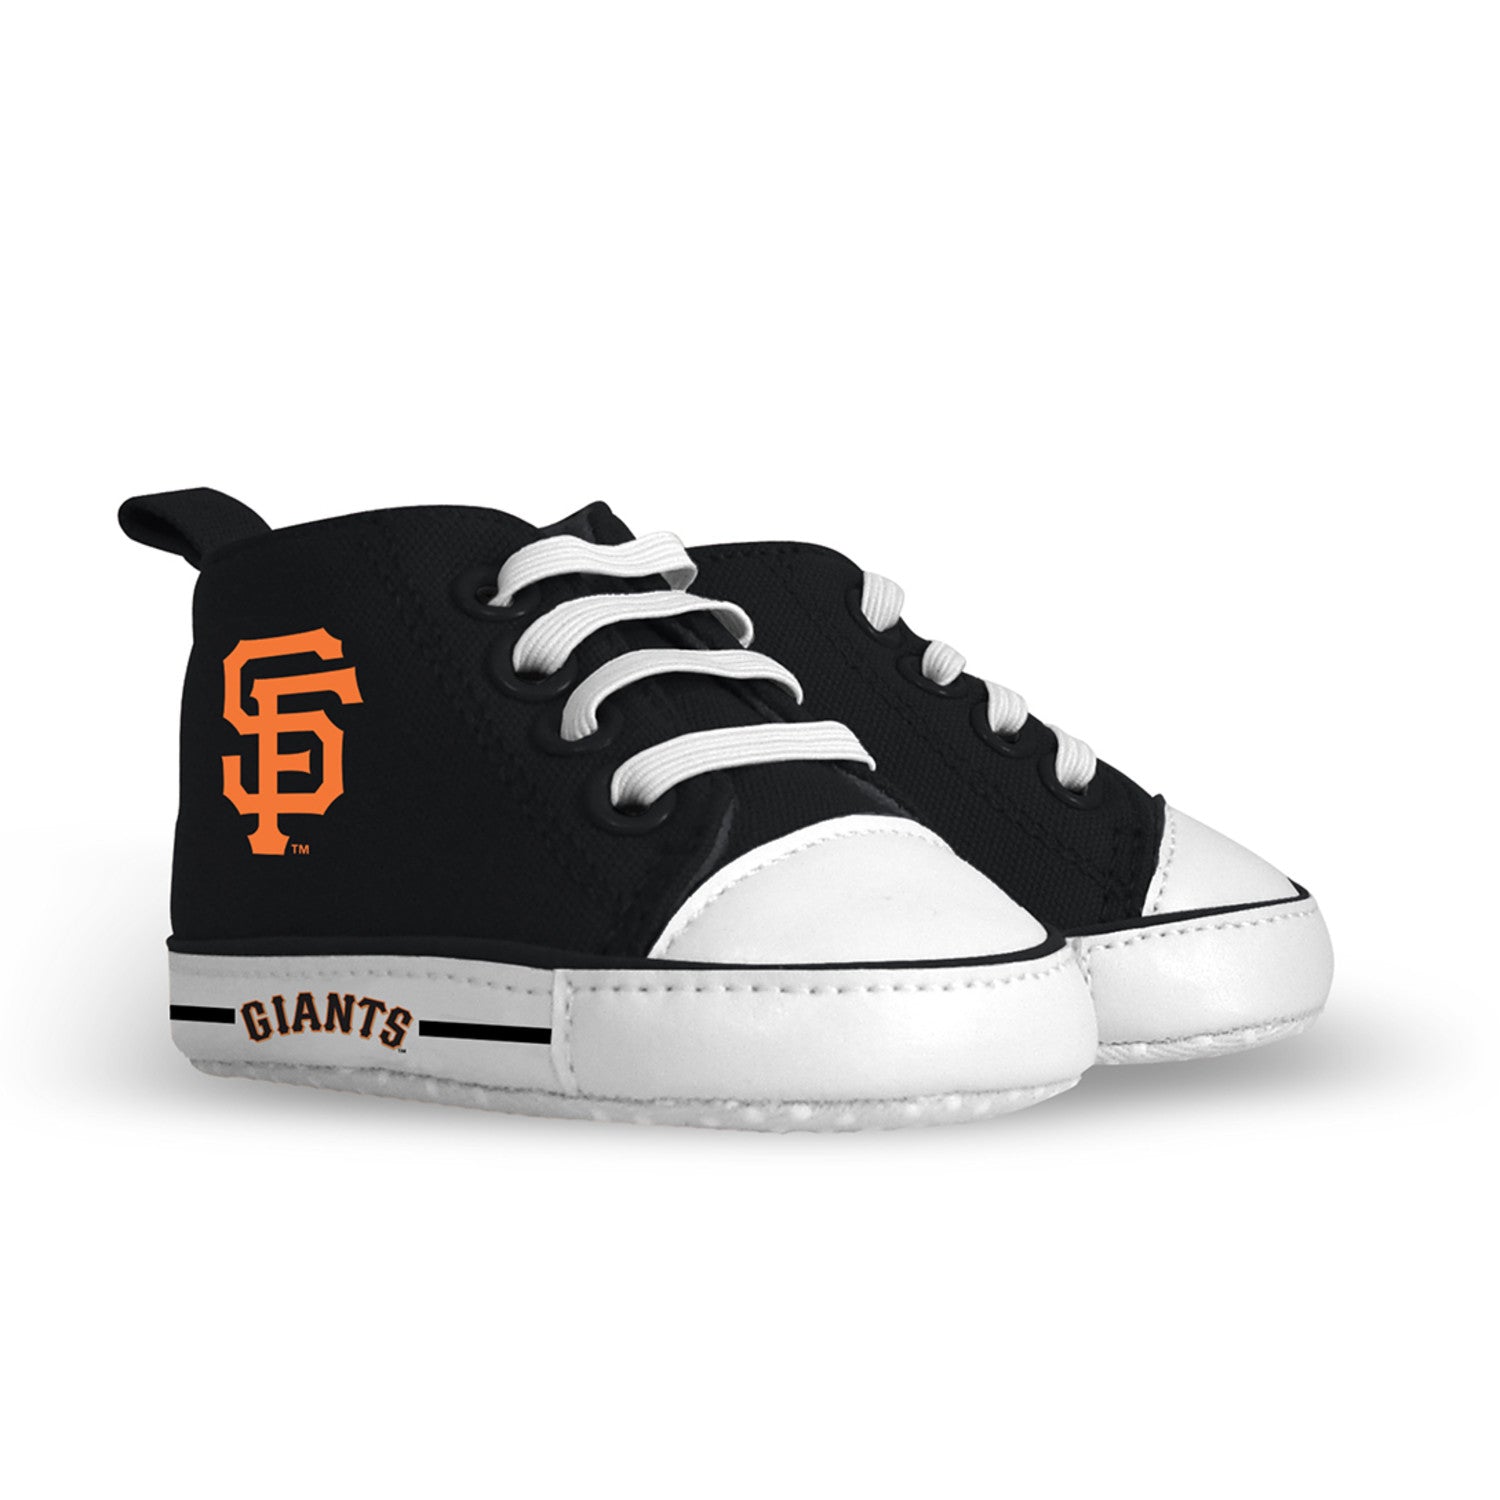 San Francisco Giants Baby Shoes